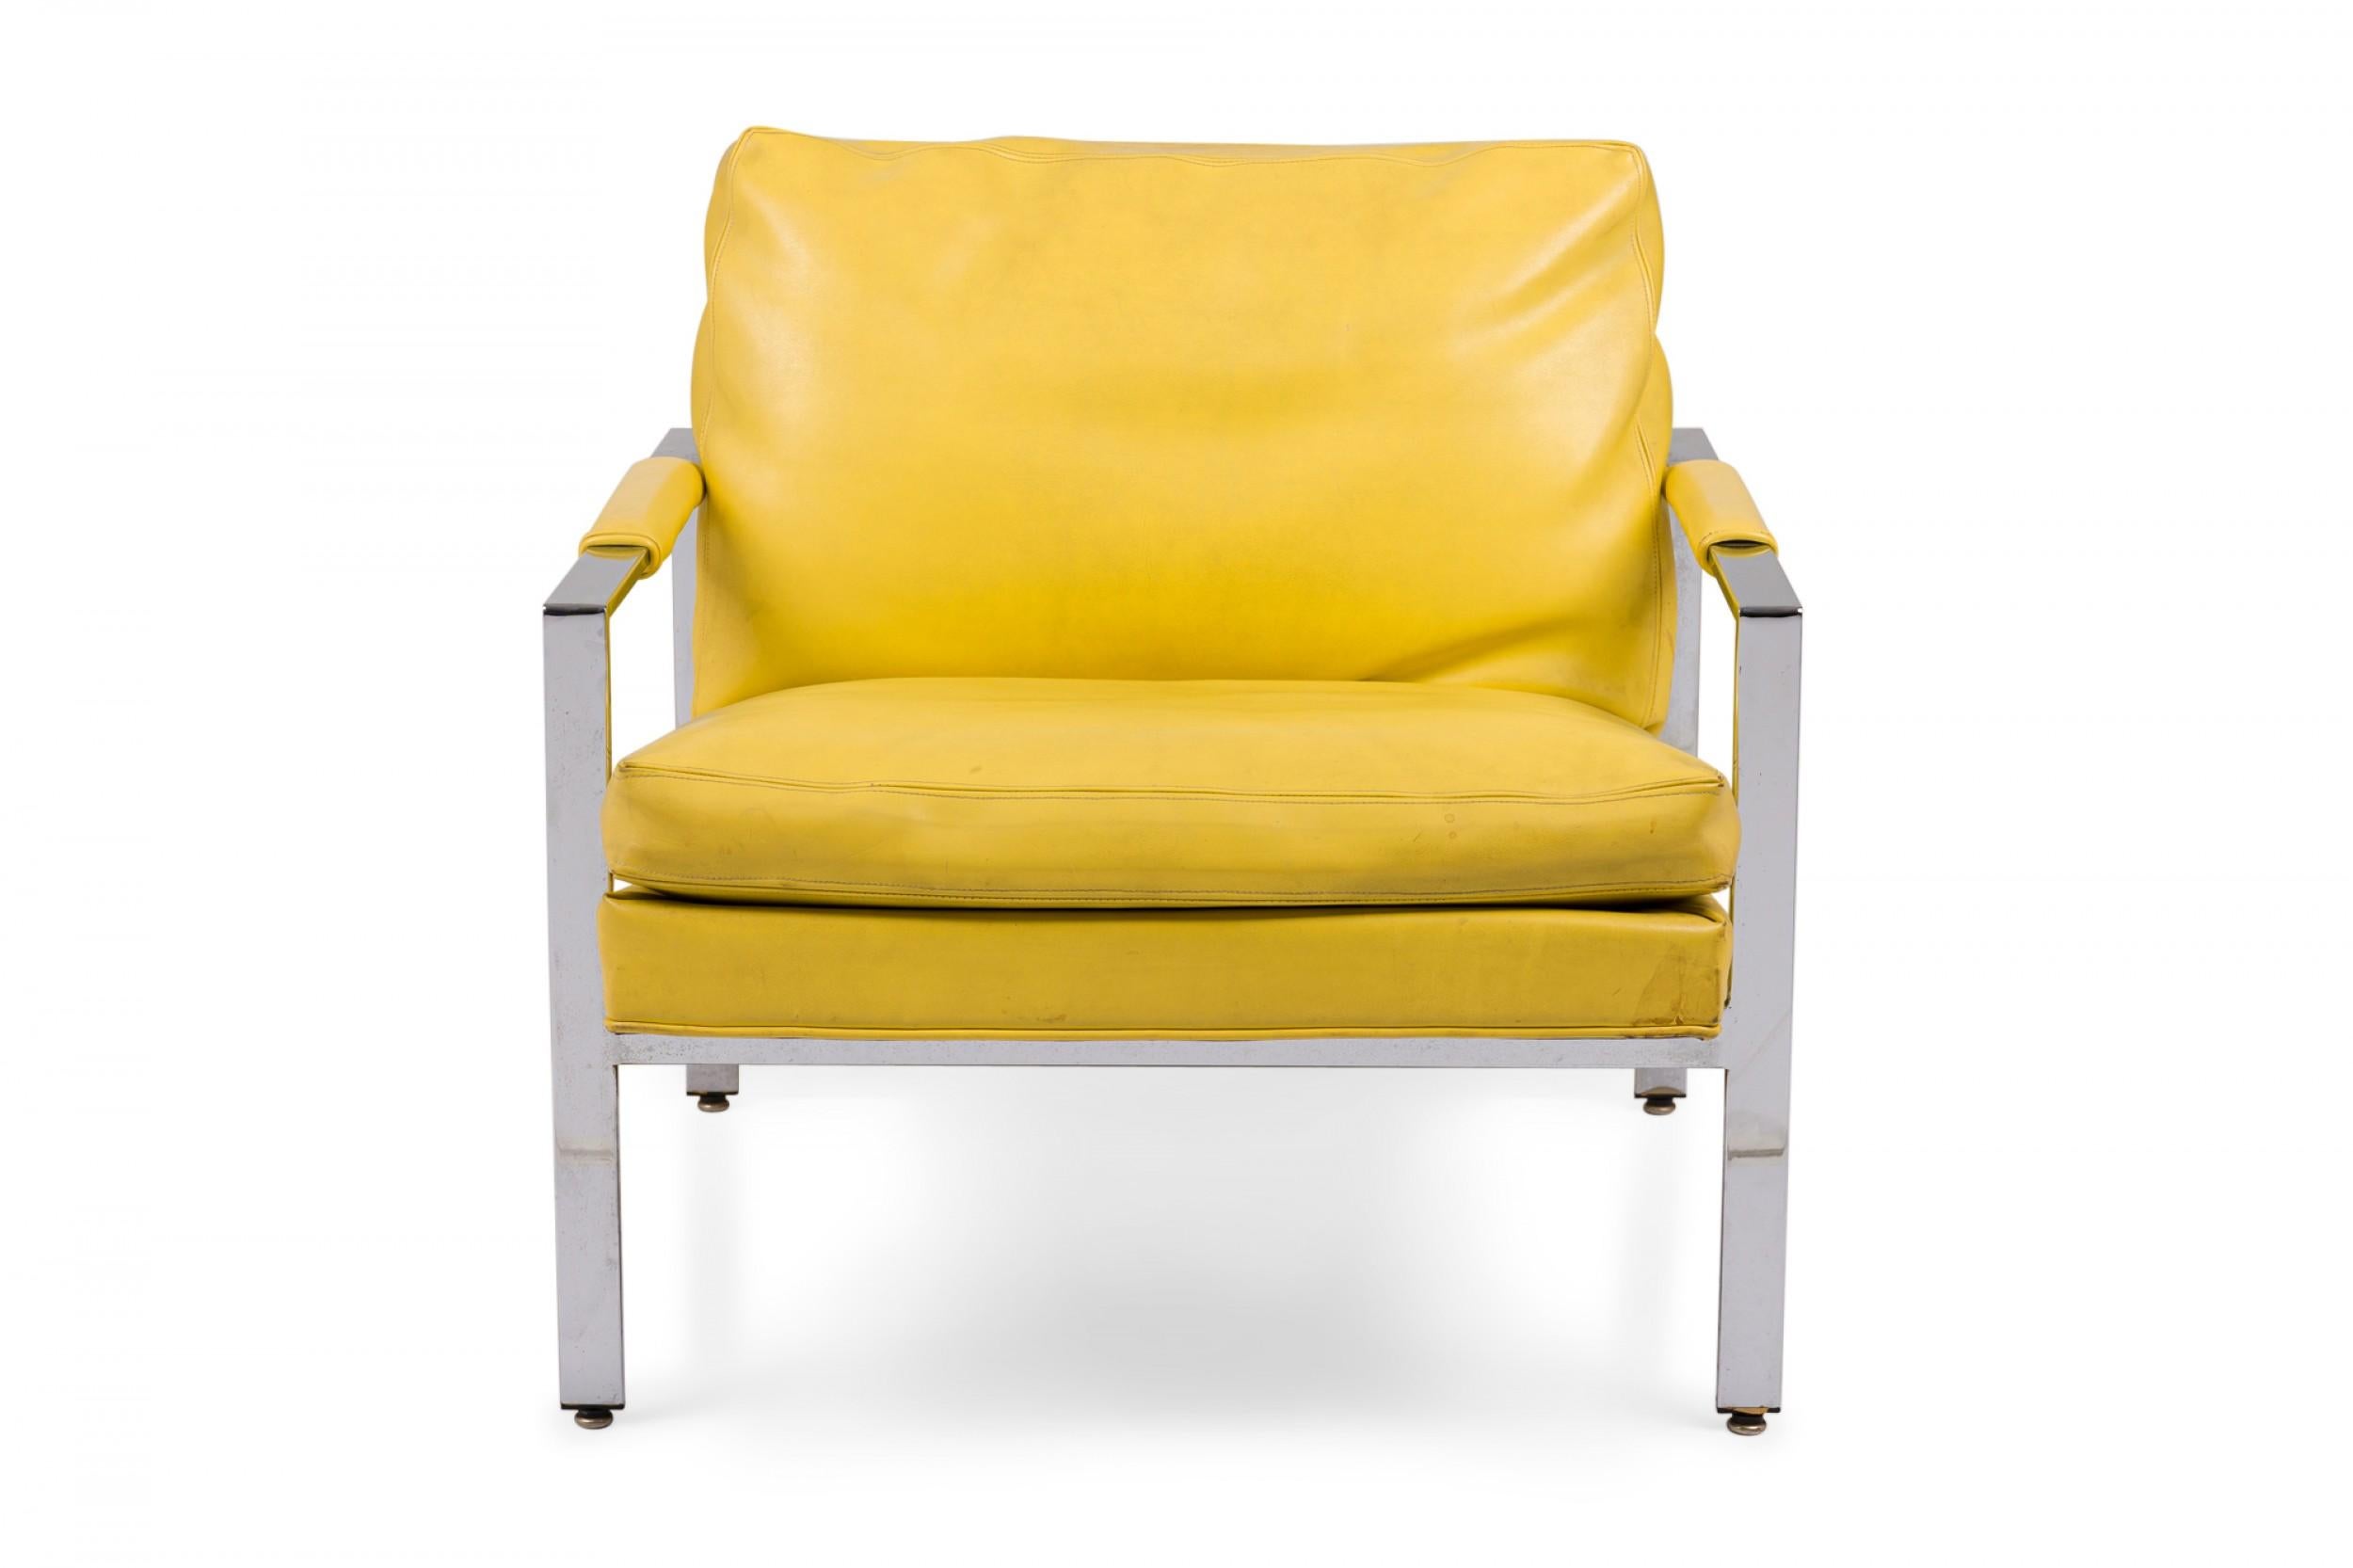 American Mid-Century lounge armchair with a polished chrome flat bar frame, upholstered in bright yellow vinyl. (MILO BAUGHMAN FOR THAYER COGGIN).
 